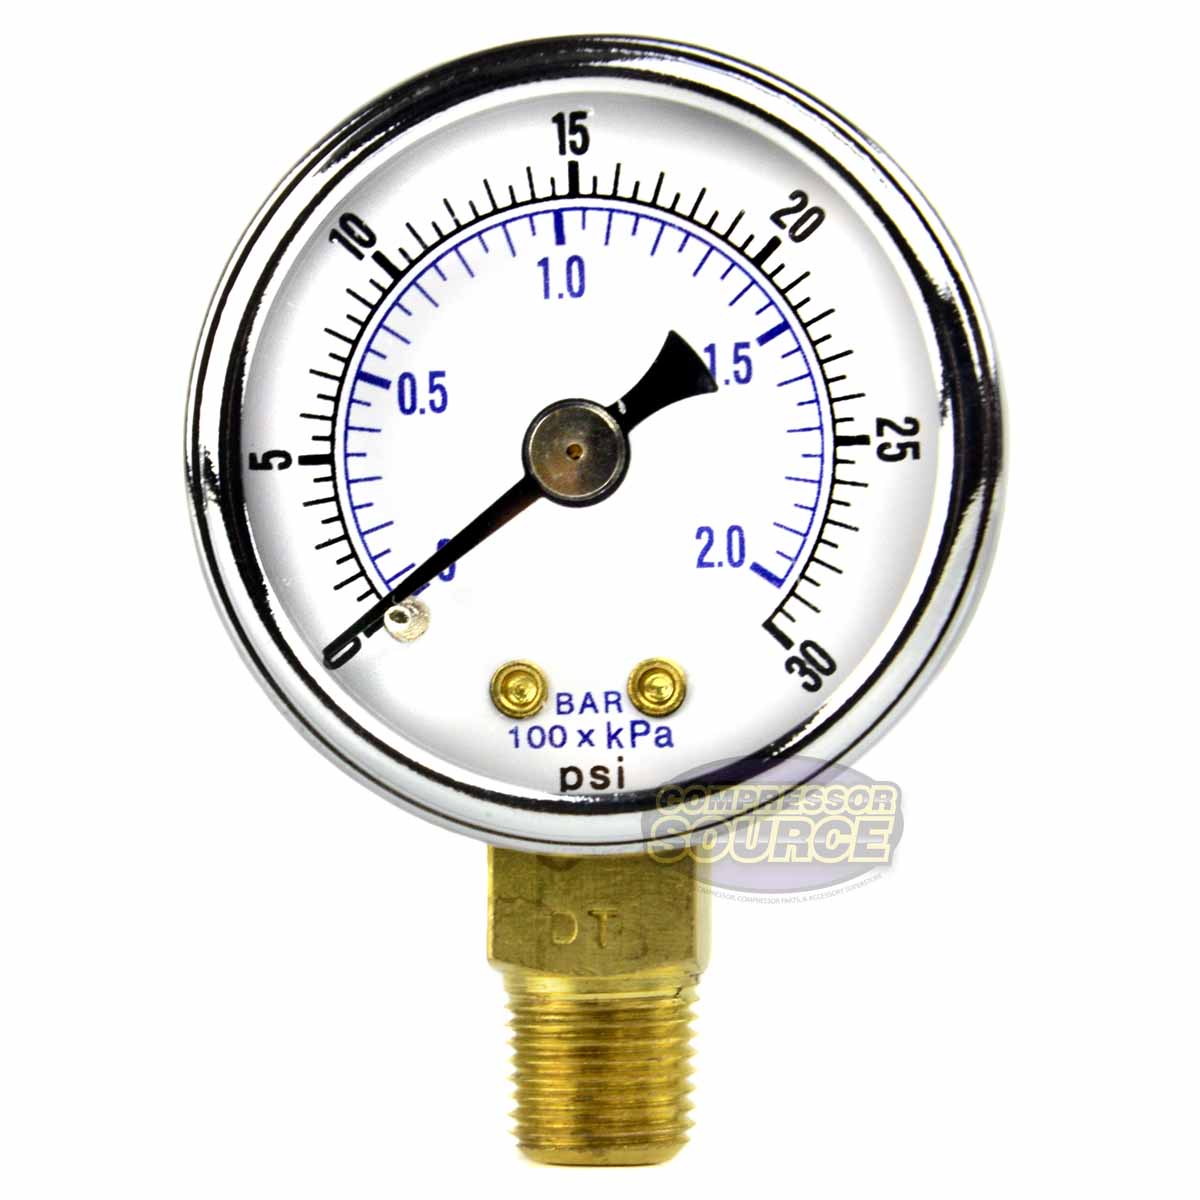 1/8" NPT 0-30 PSI Air Compressor / Hydraulic Pressure Gauge Lower Side Mount With 1.5" Face